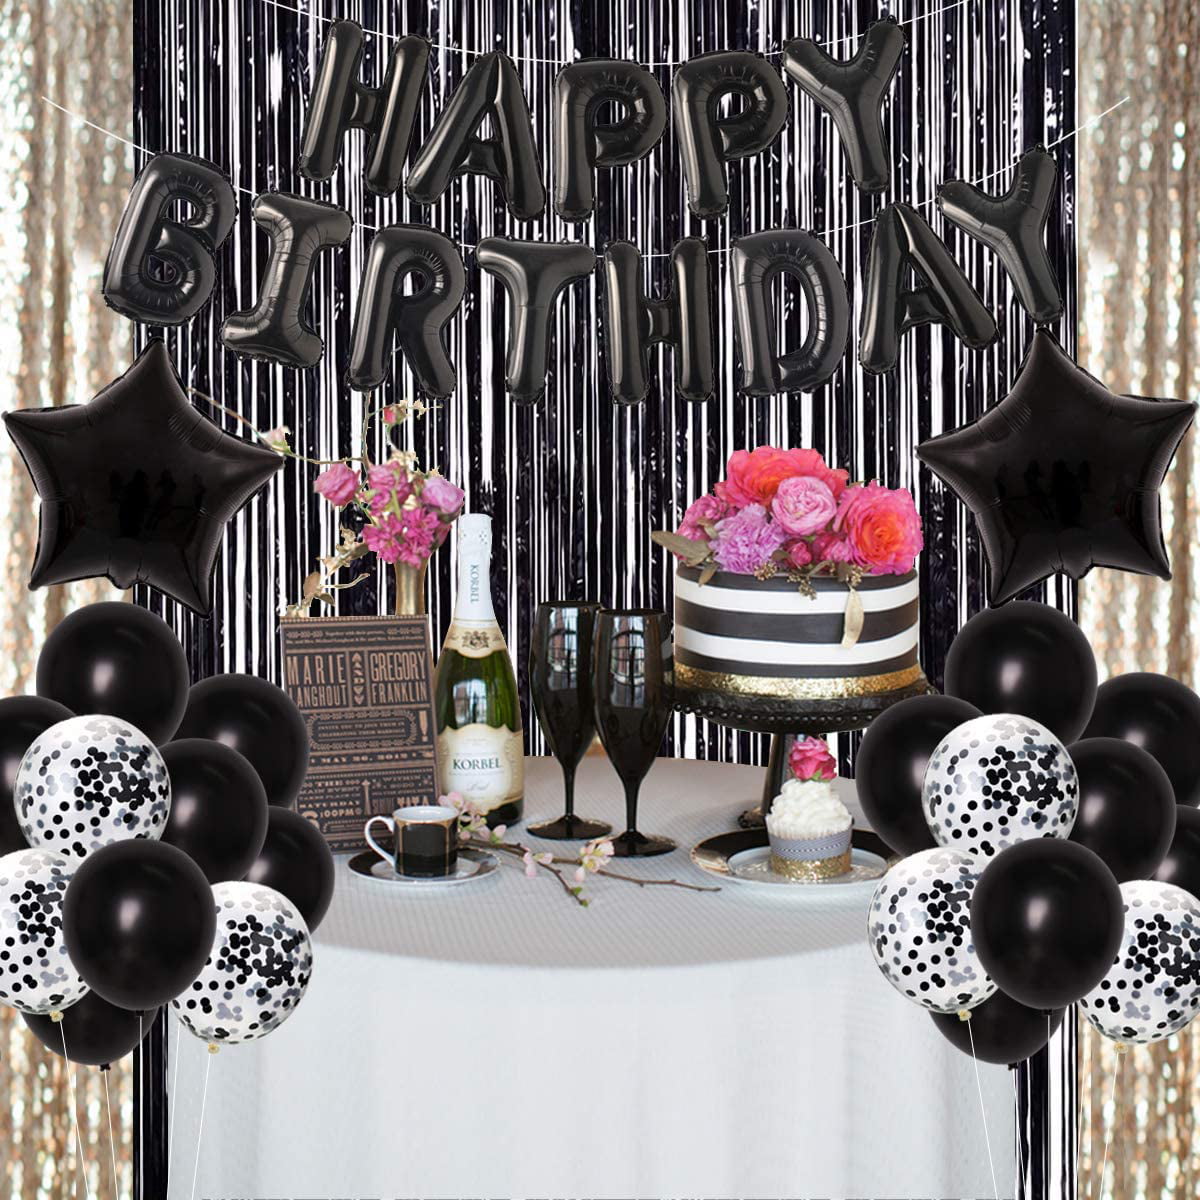 ANSOMO Black and White Happy Birthday Party Decorations, 30 Pcs Balloons Banner Foil Fringe Curtains, for Men Women